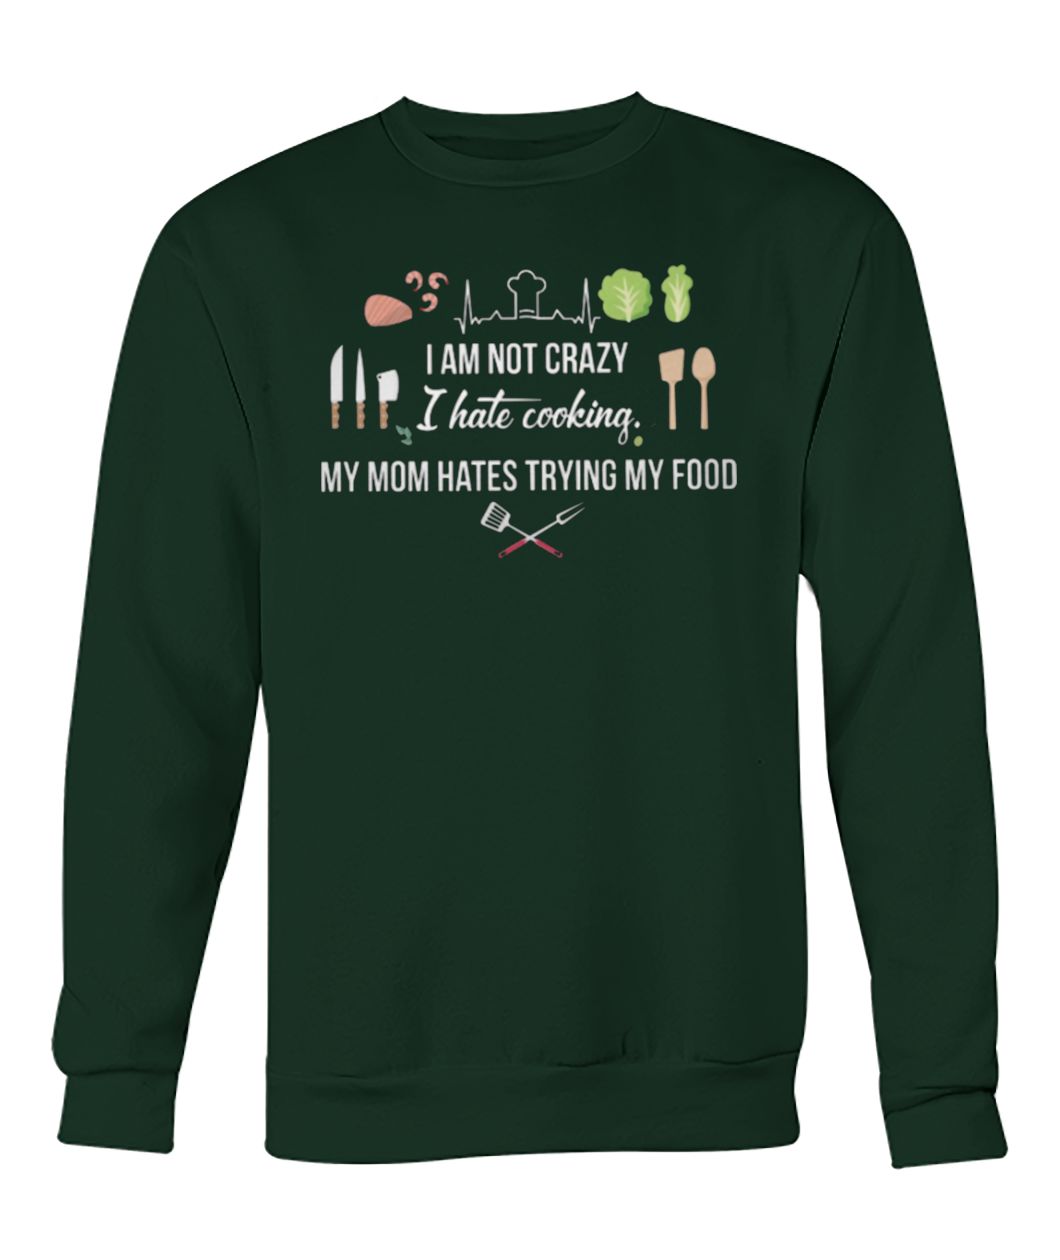 I am not crazy I hate cooking my mom hate trying my food sweatshirt